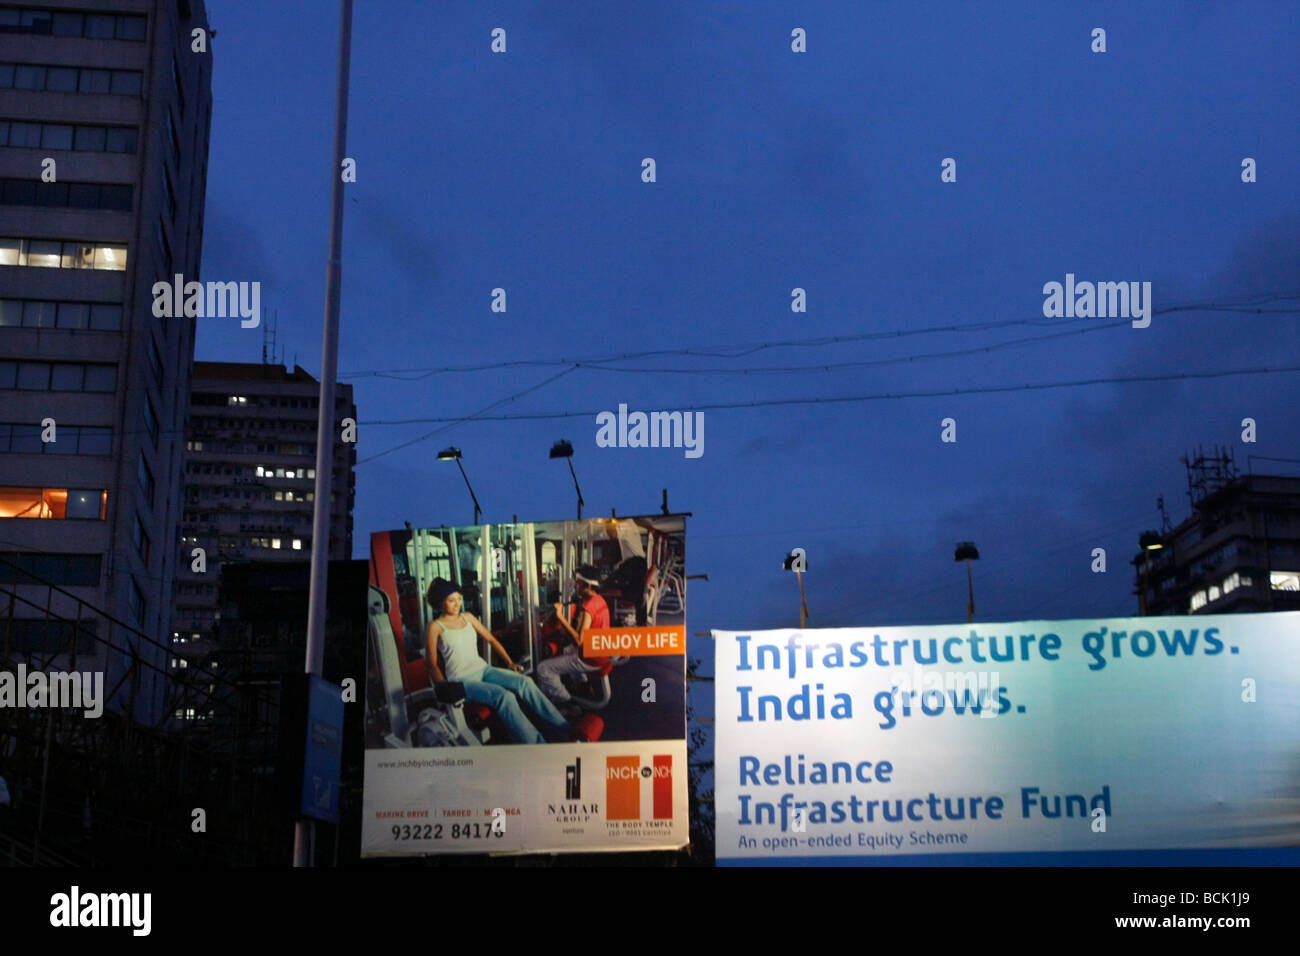 Large boards advertise for real estate and infrastructure along the Marine Drive in Mumbai (Bombay) in India Stock Photo